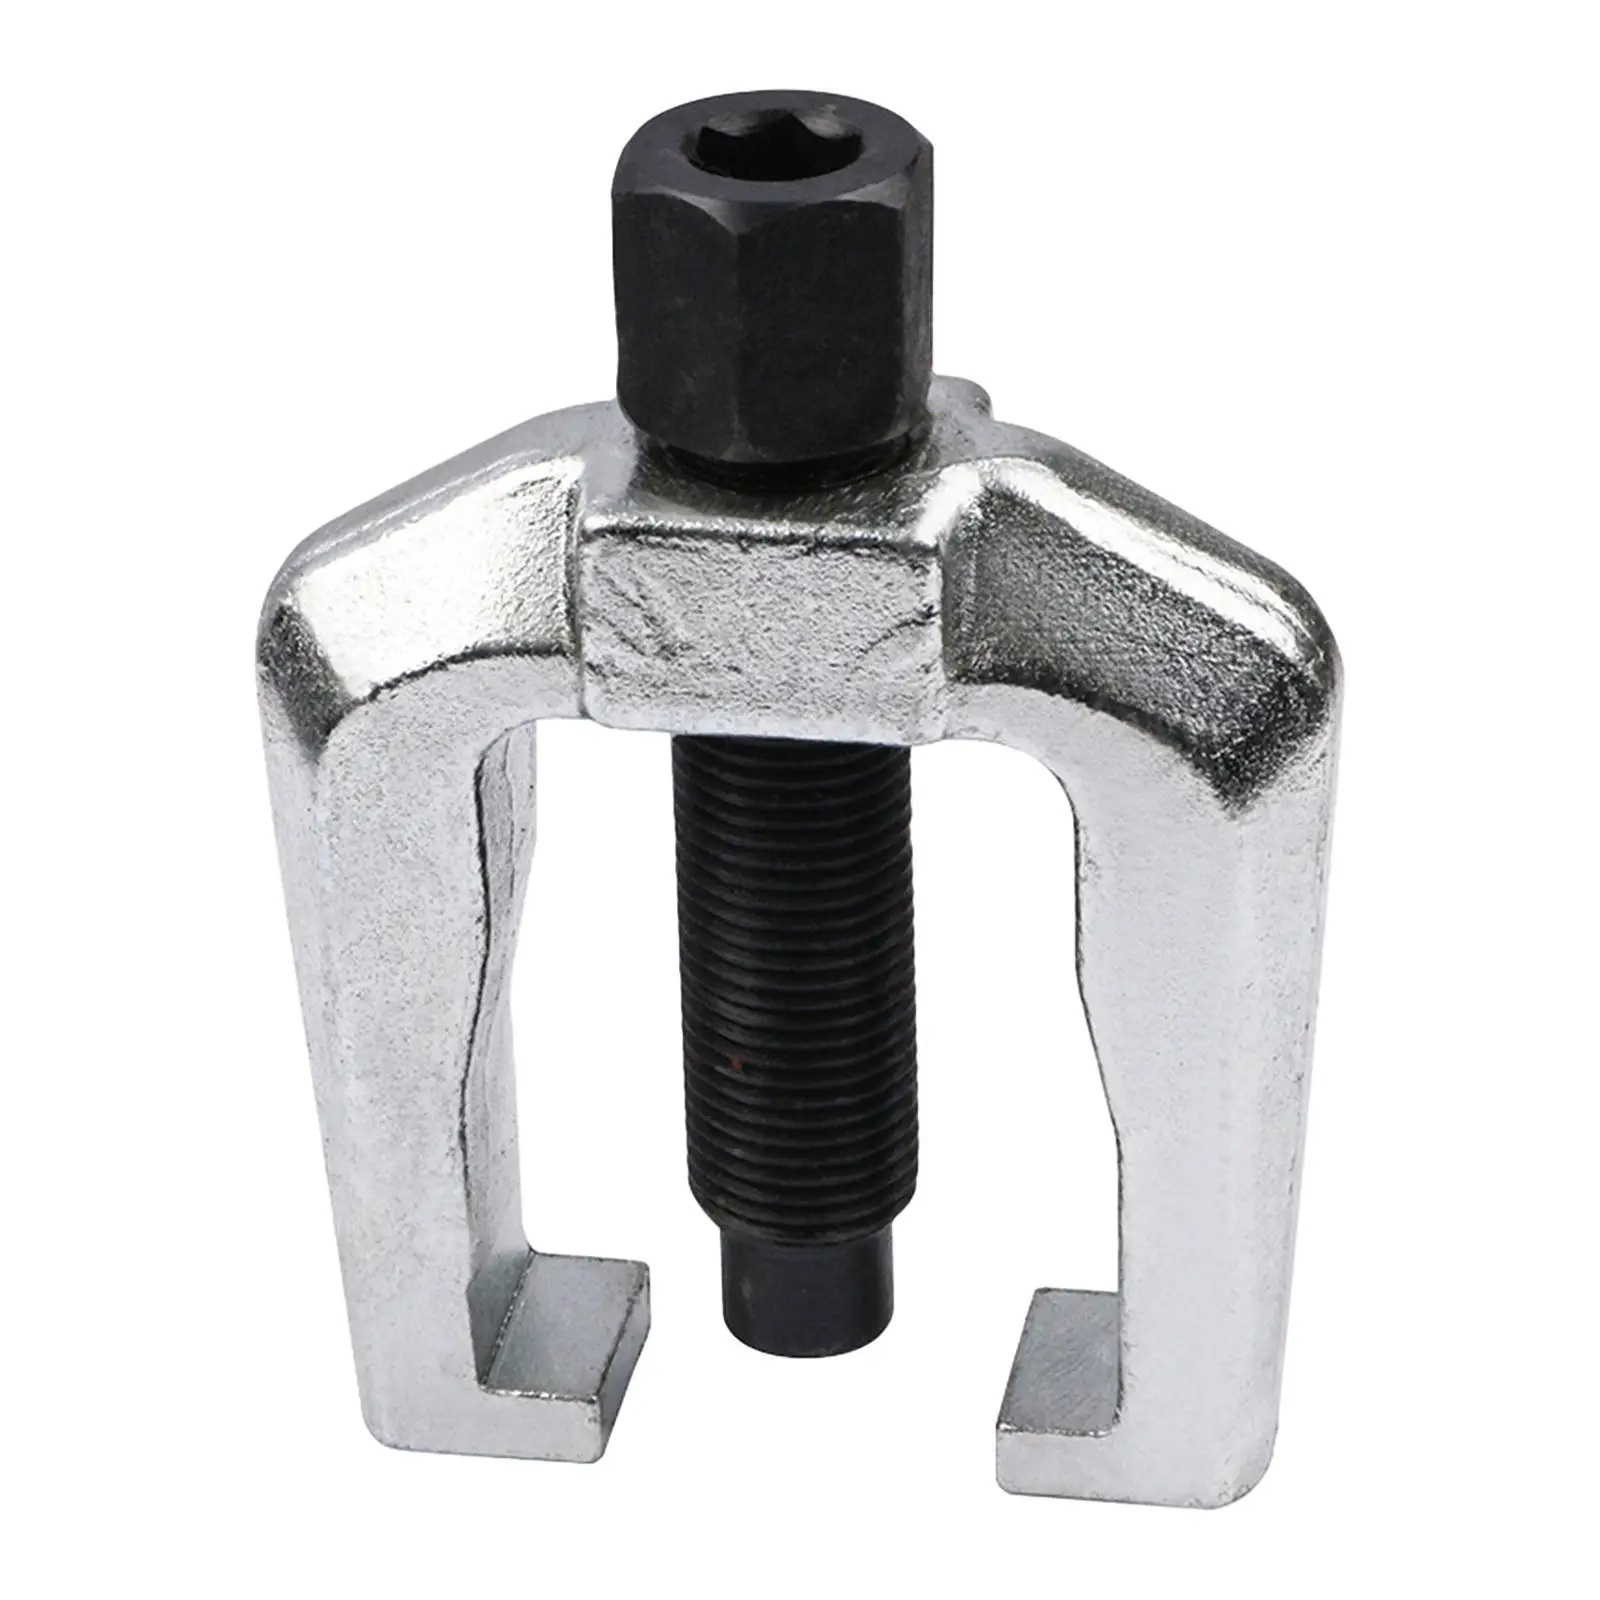 Slack Adjuster Puller High Performance Sturdy Remove Tool Easy to Operate Metal Repair Tool Removal Tool for Gears Remover Tool